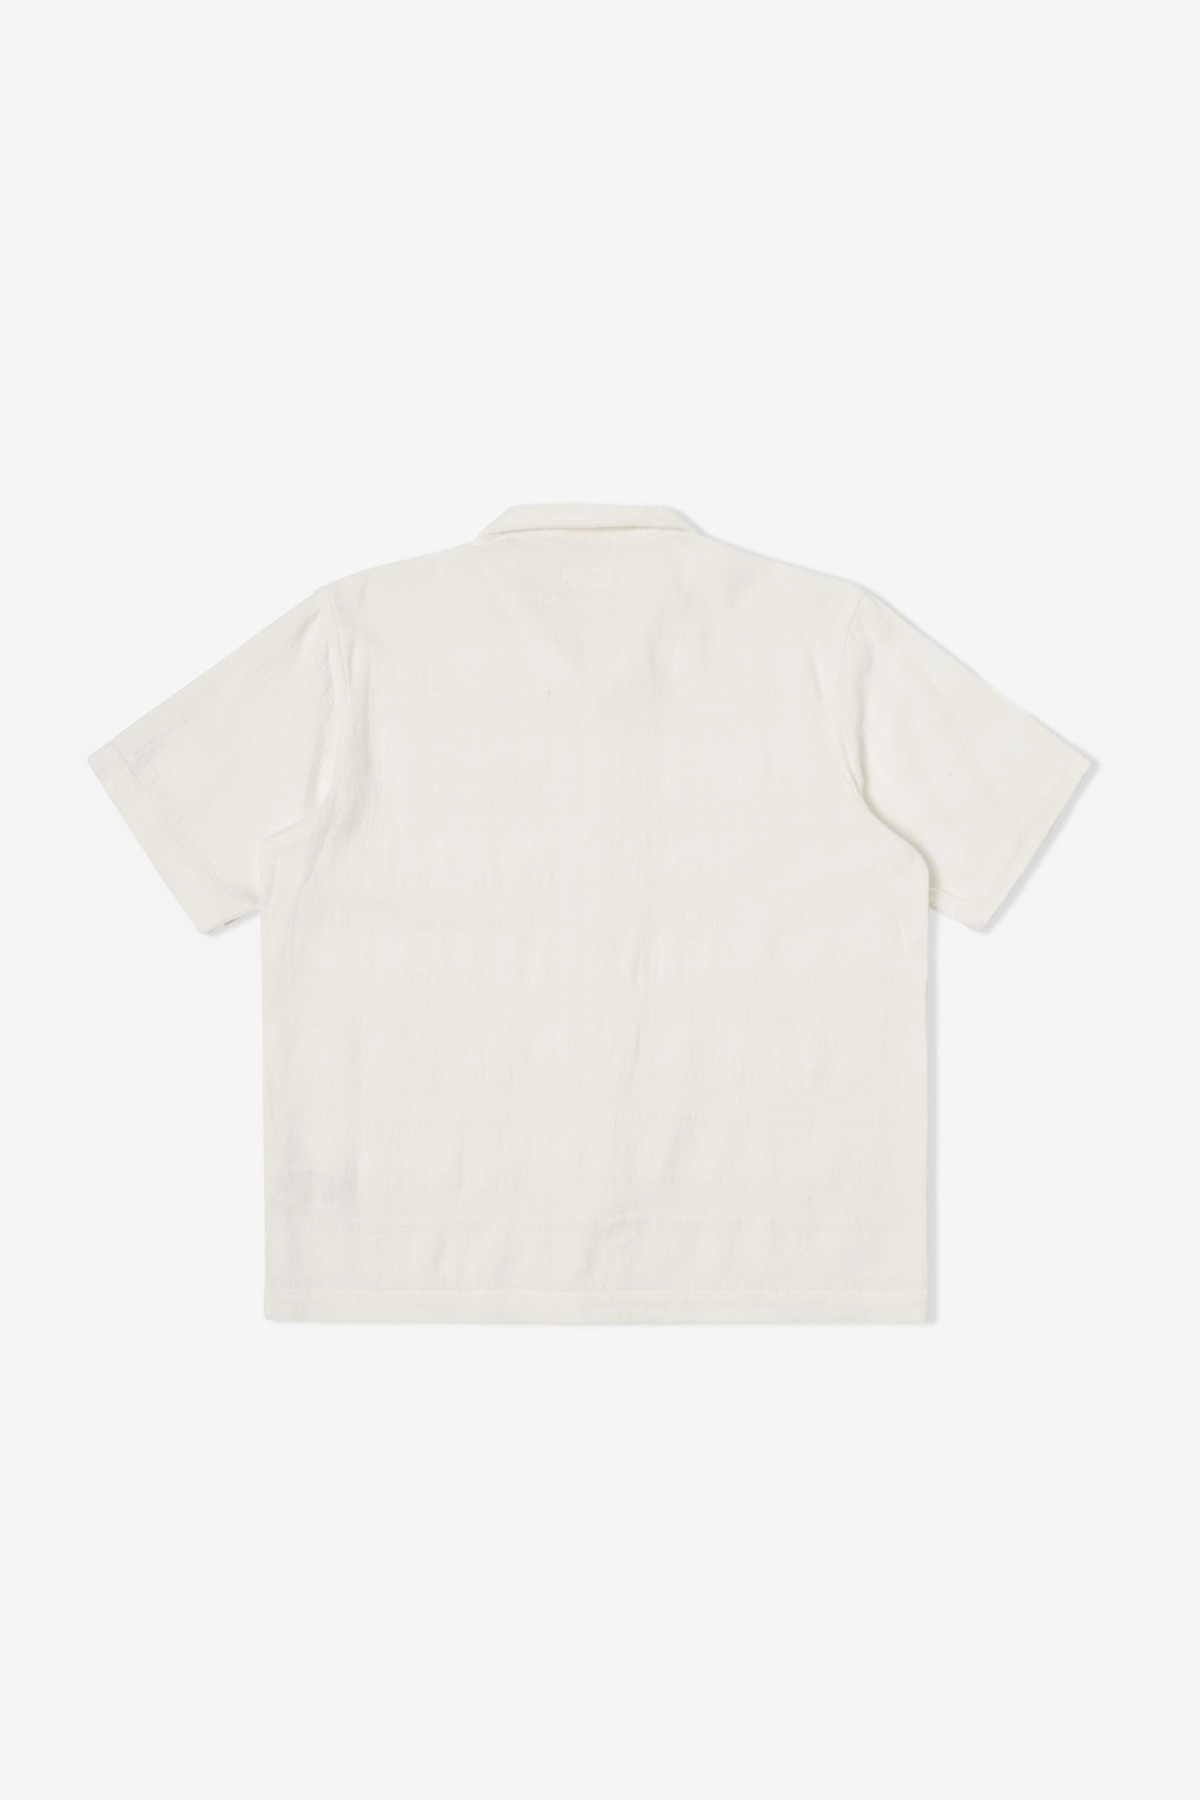 Universal Works Road Shirt in White